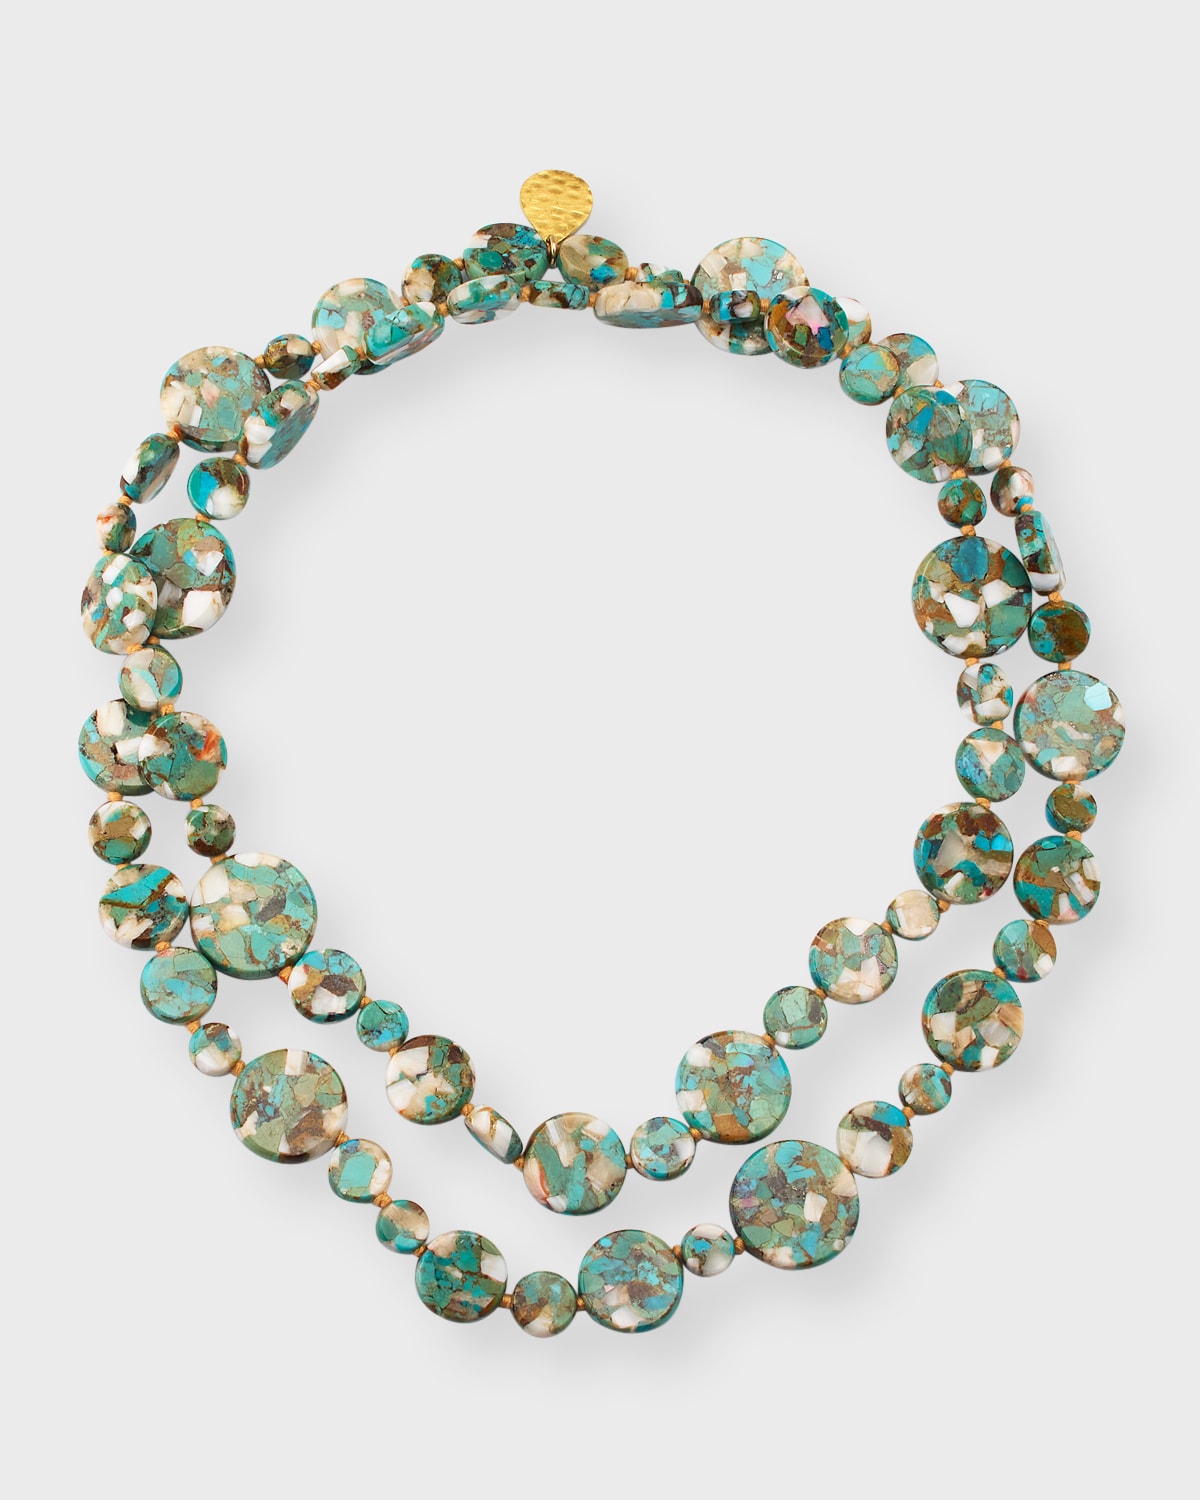 Devon Leigh Long Turquoise And Pearly Coin Necklace, 36"l